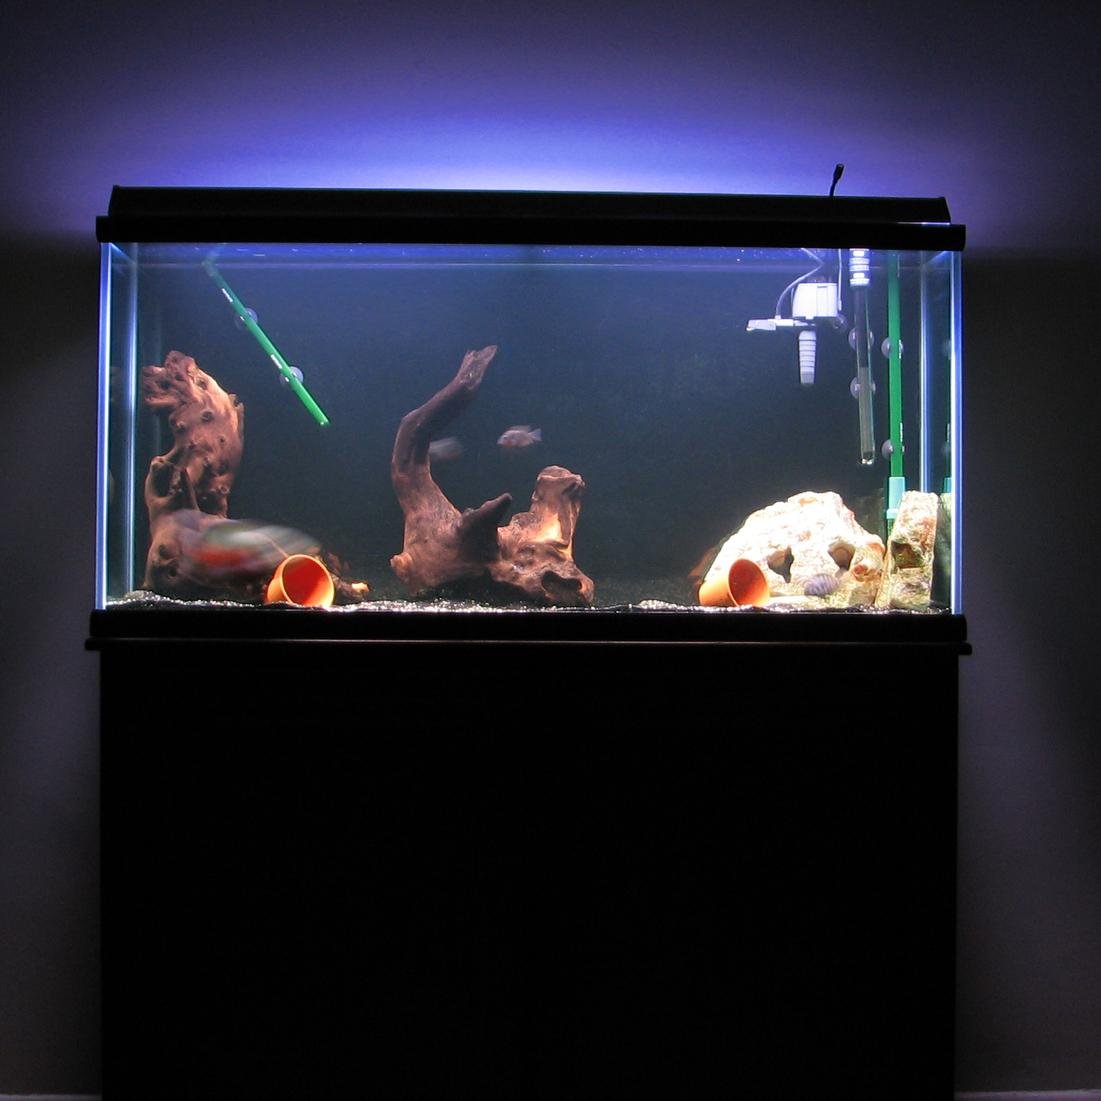 Everything you need to know about aquarium backgrounds and design!